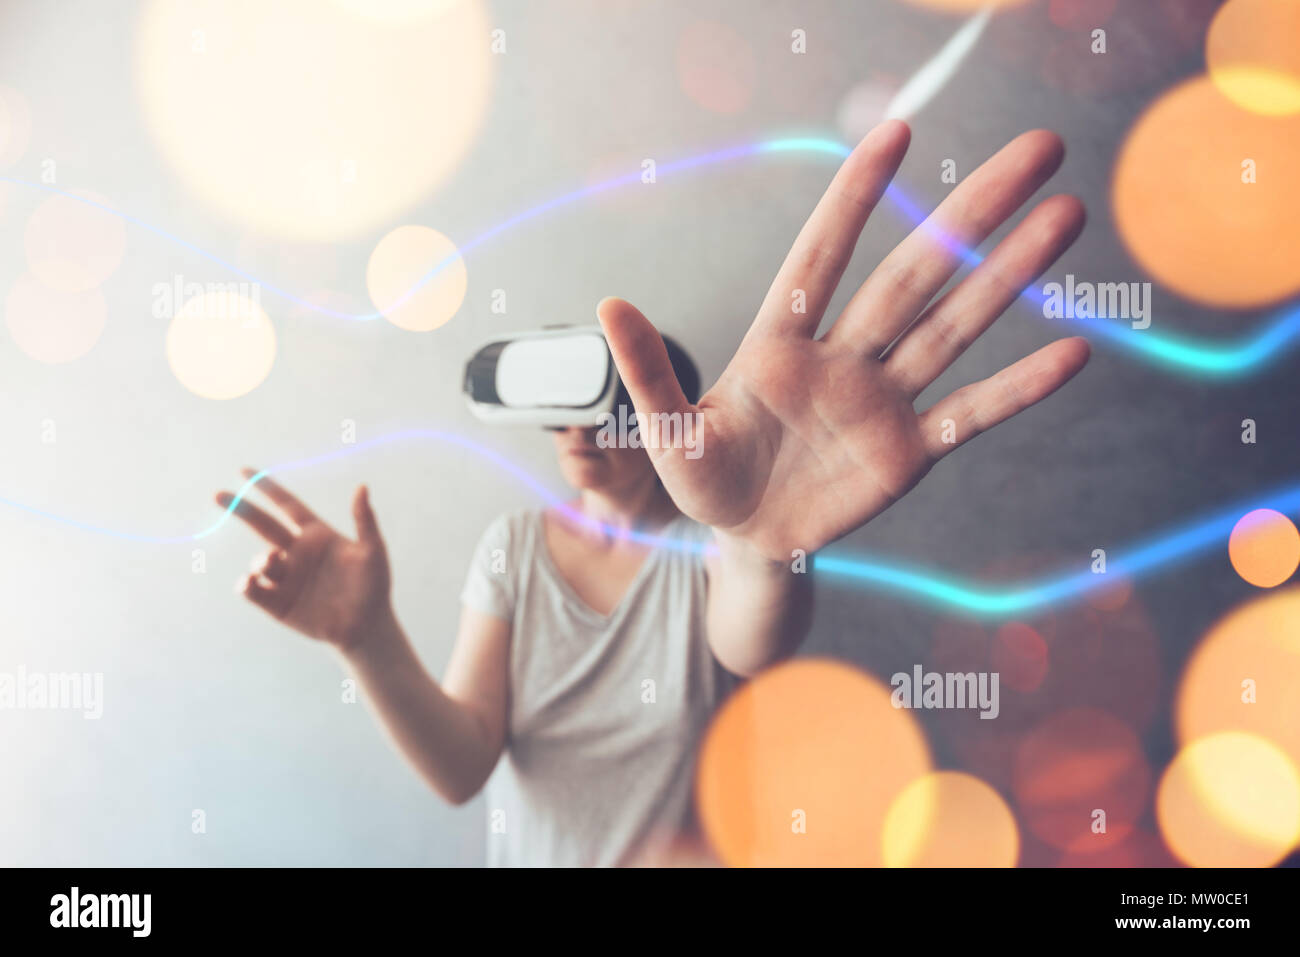 Woman using VR headset. Conceptual mixed media image of female person immersed in virtual reality. Stock Photo